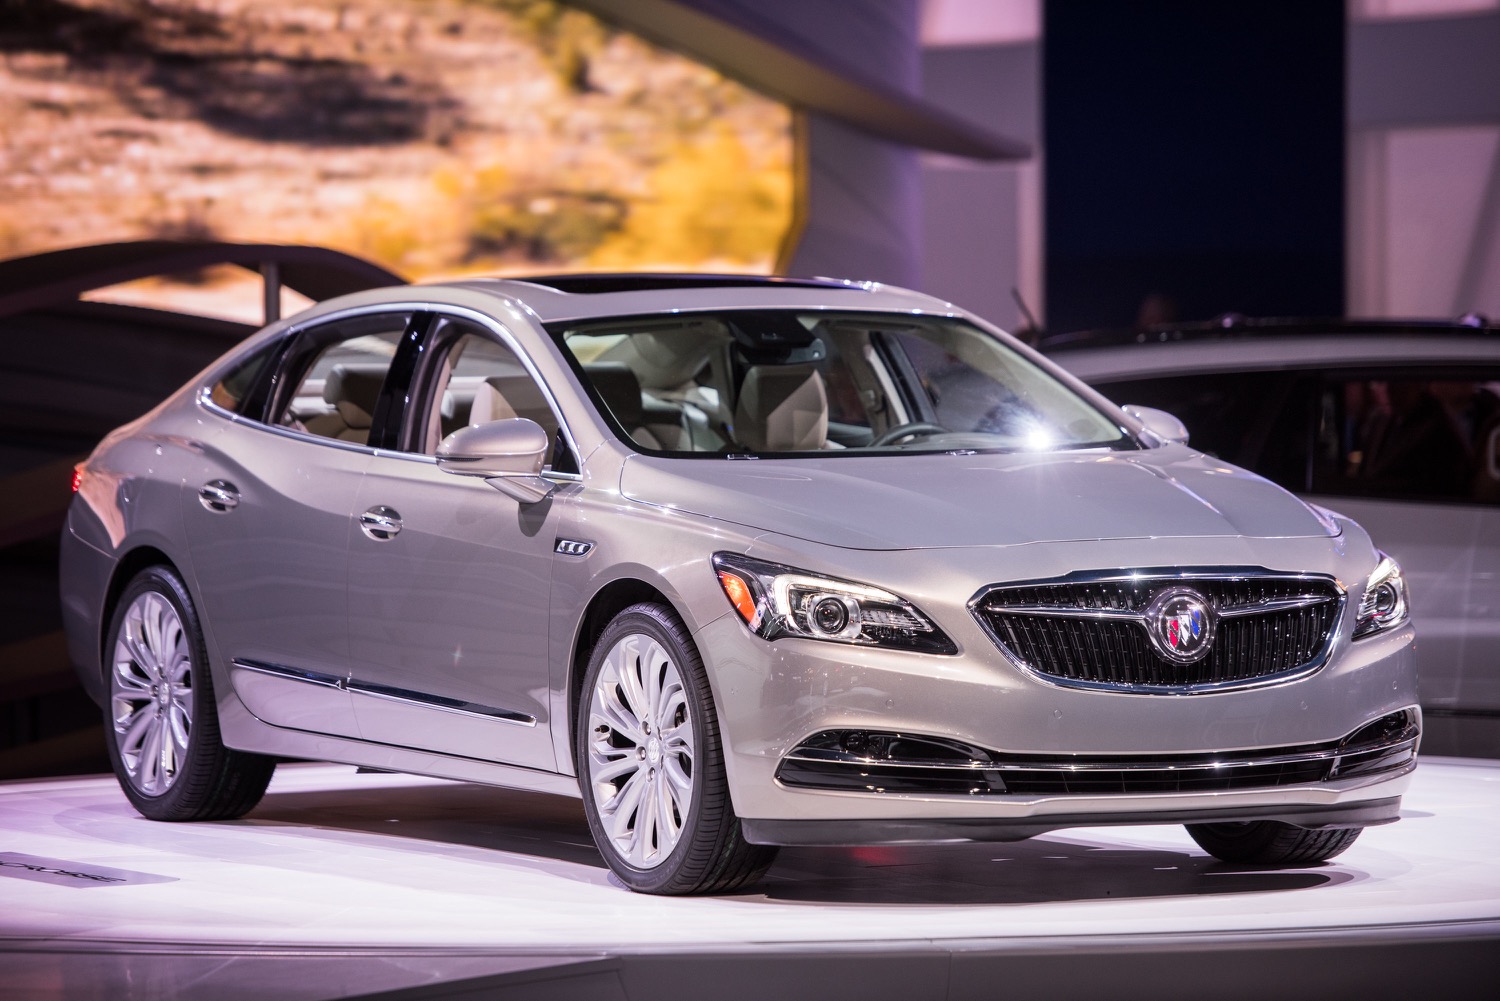 2017 Buick LaCrosse Price And Trim Levels | GM Authority